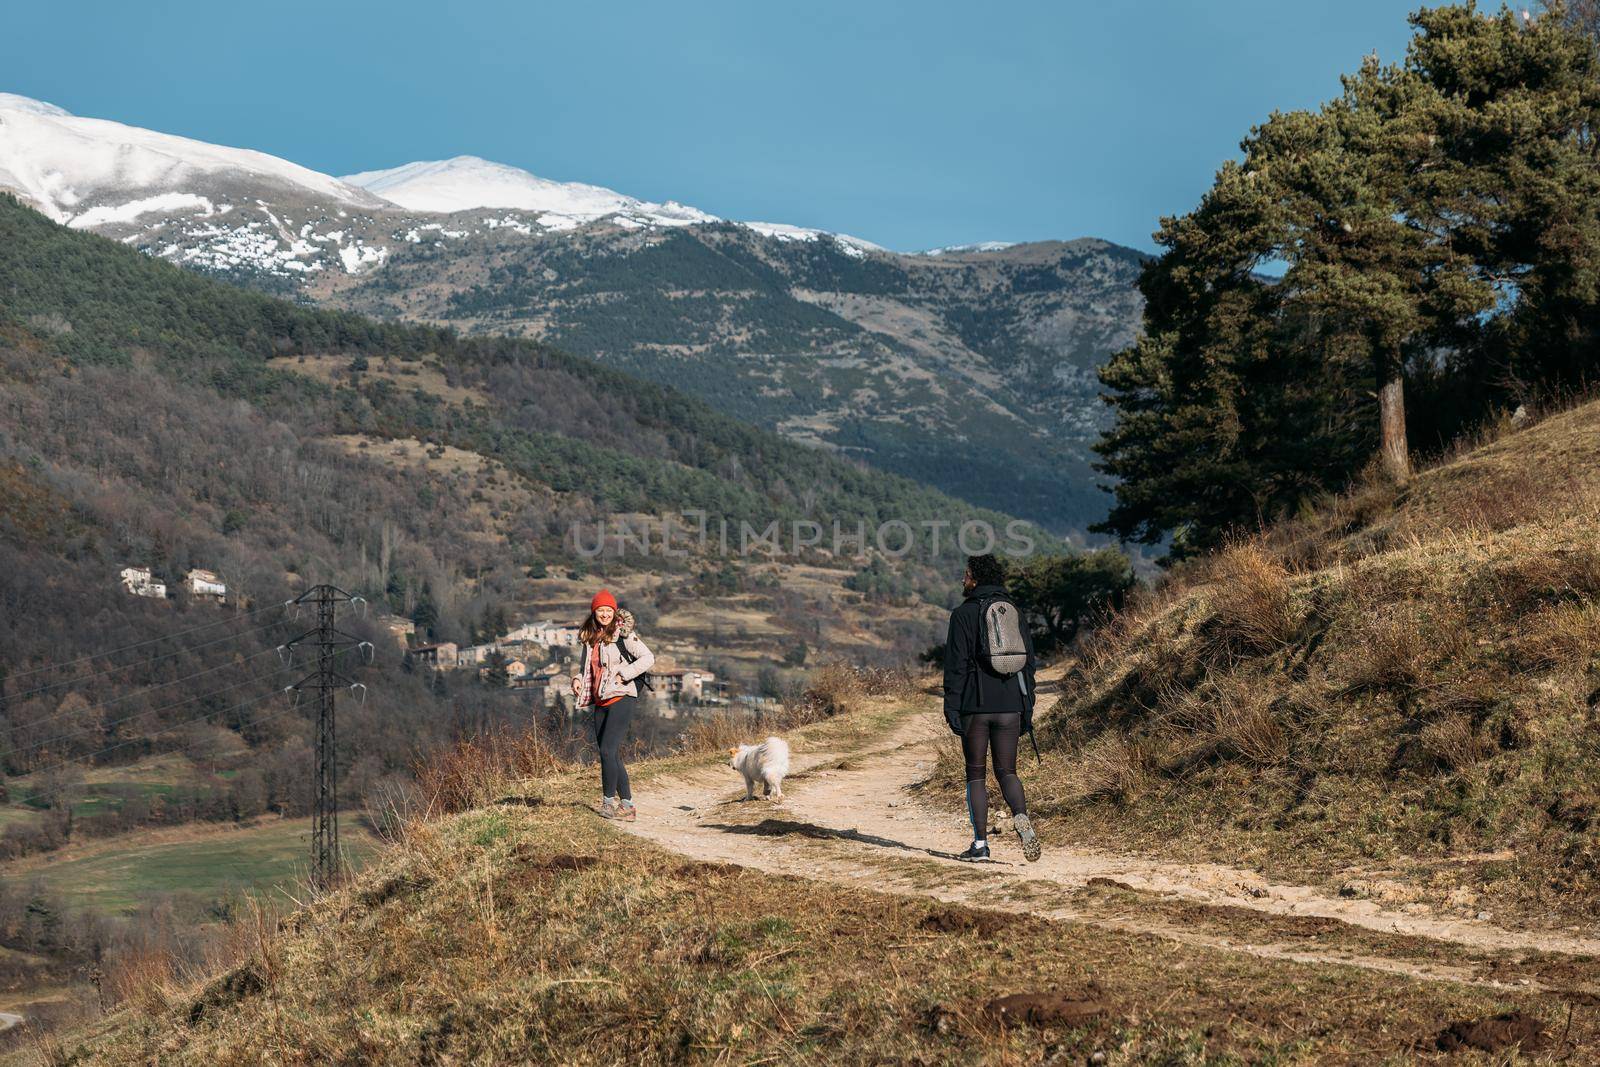 A couple of hikers with backpacks and a dog walking along beautiful area with snowy mountains, forest and blue sky. The concept of active rest